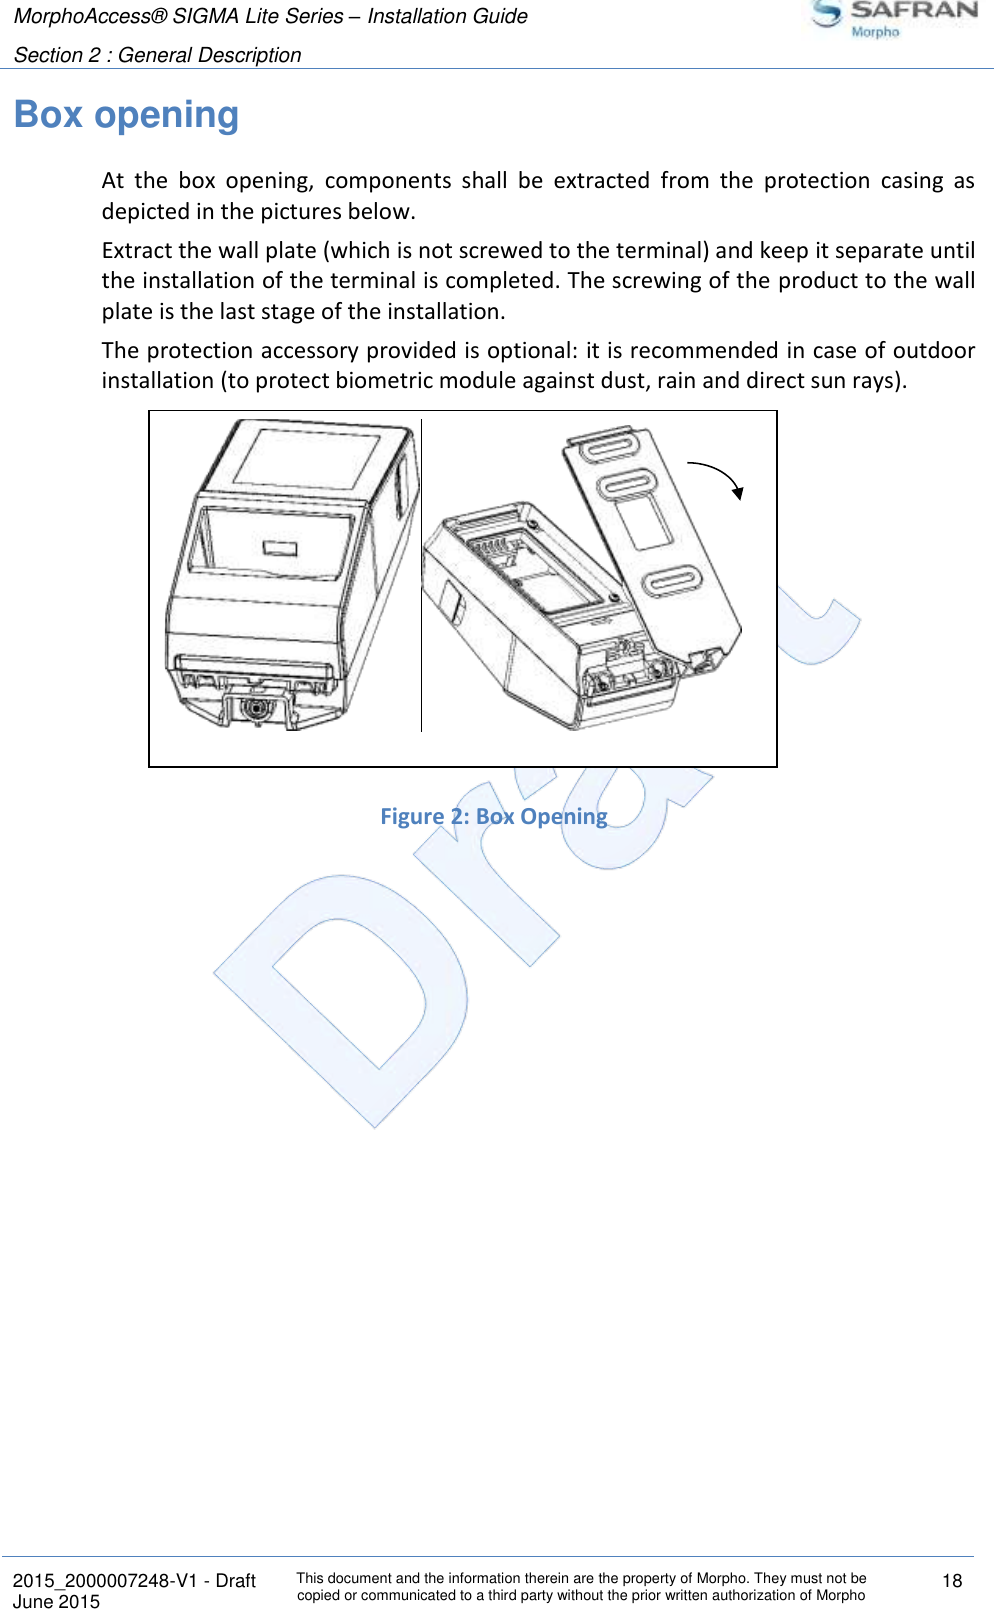 MorphoAccess® SIGMA Lite Series – Installation Guide  Section 2 : General Description   2015_2000007248-V1 - Draft This document and the information therein are the property of Morpho. They must not be copied or communicated to a third party without the prior written authorization of Morpho 18 June 2015   Box opening At  the  box  opening,  components  shall  be  extracted  from  the  protection  casing  as depicted in the pictures below. Extract the wall plate (which is not screwed to the terminal) and keep it separate until the installation of the terminal is completed. The screwing of the product to the wall plate is the last stage of the installation. The protection accessory provided is optional: it is recommended in case of outdoor installation (to protect biometric module against dust, rain and direct sun rays).        Figure 2: Box Opening    